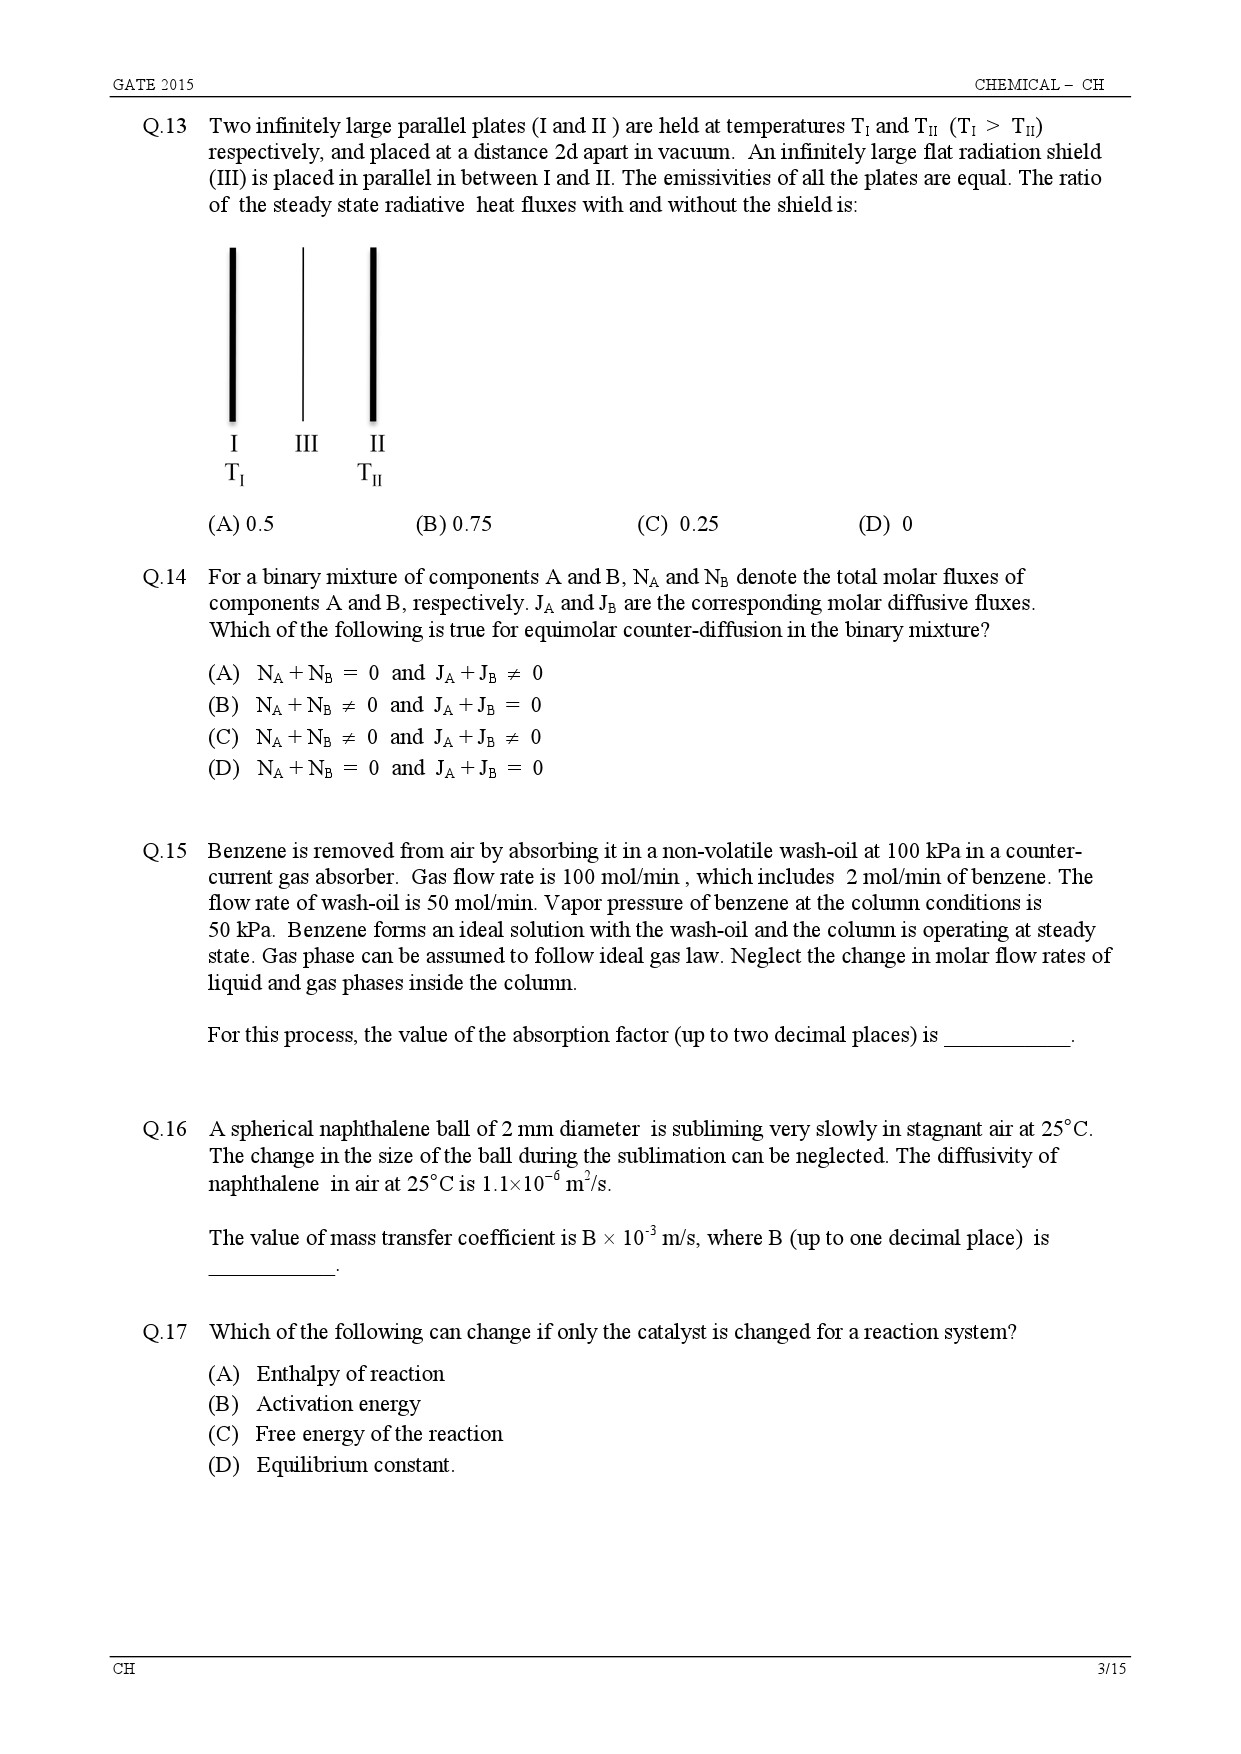 GATE Exam Question Paper 2015 Chemical Engineering 3